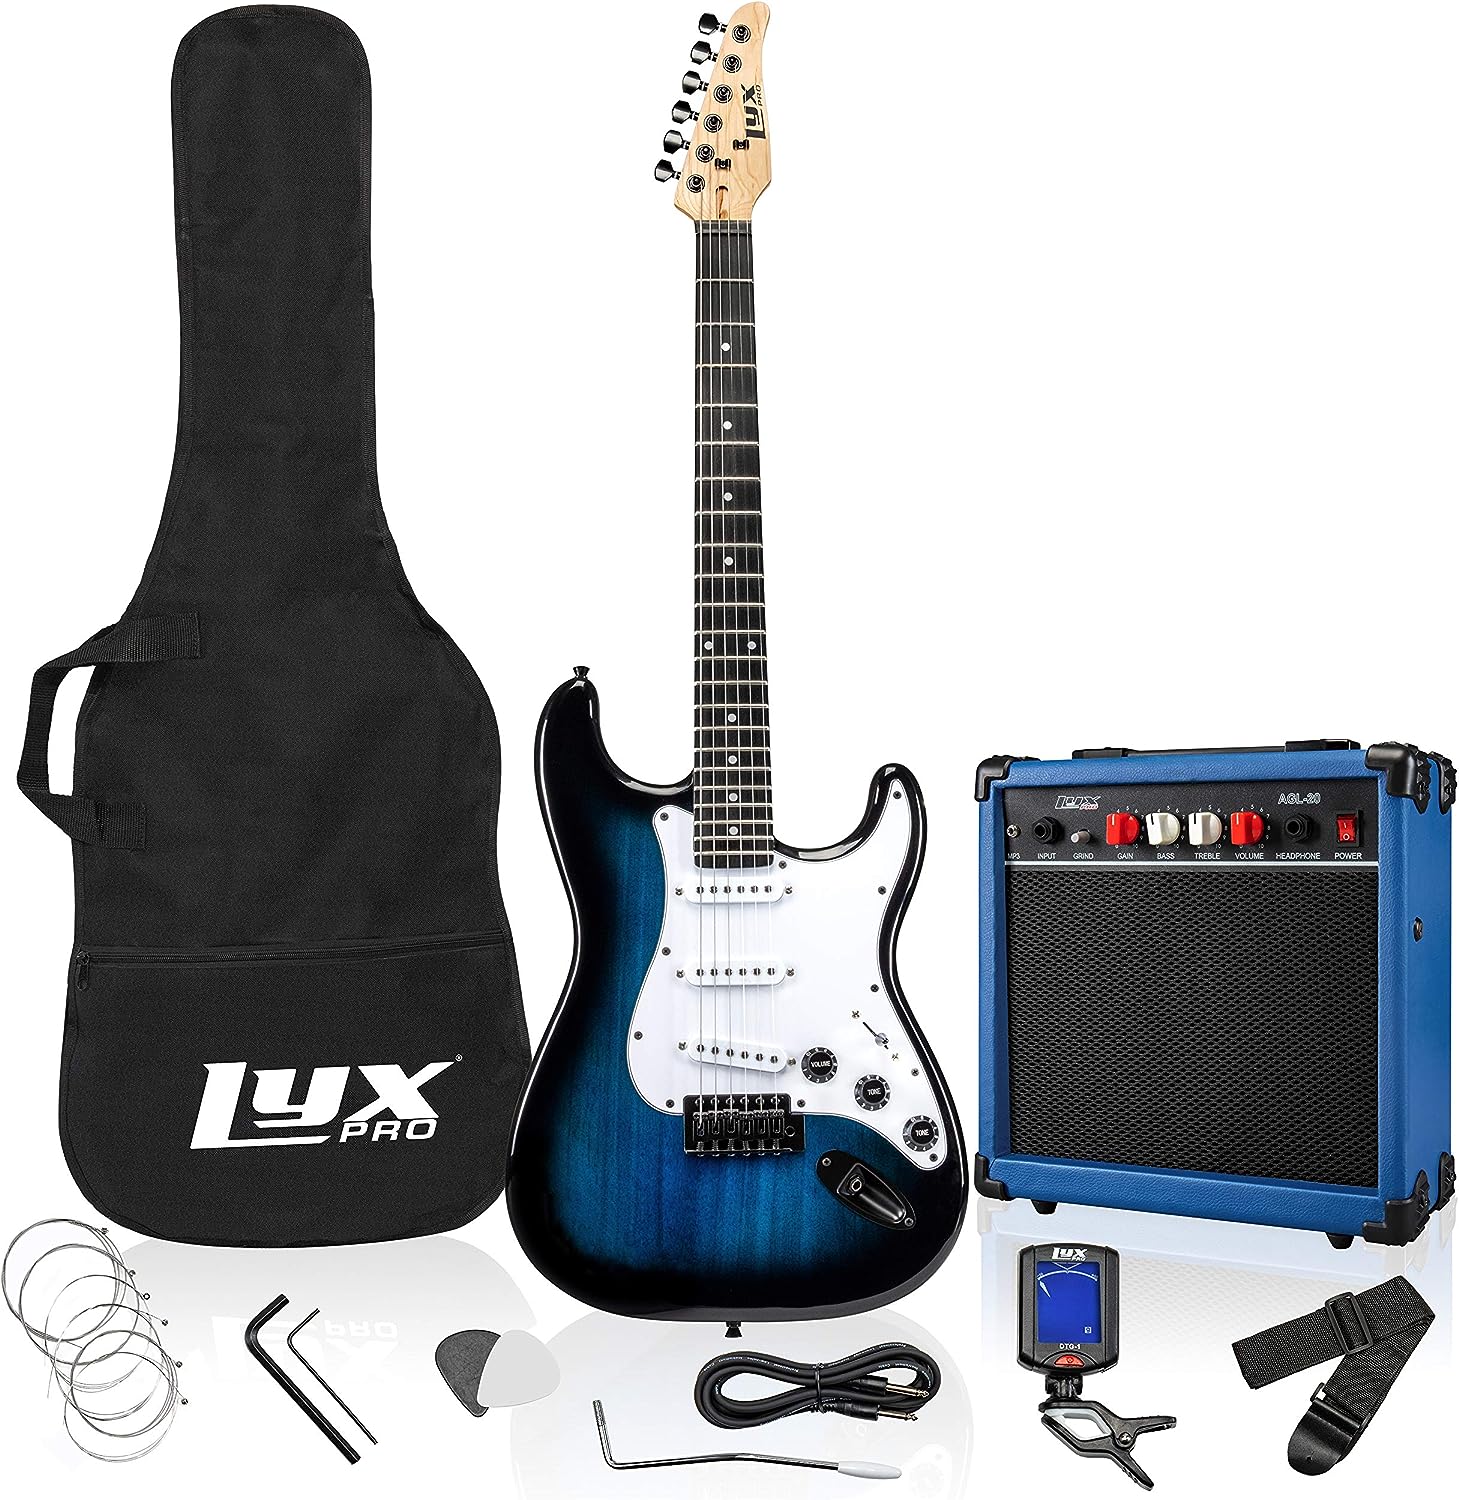 LyxPro 39 inch Electric Guitar Kit Bundle on a white background